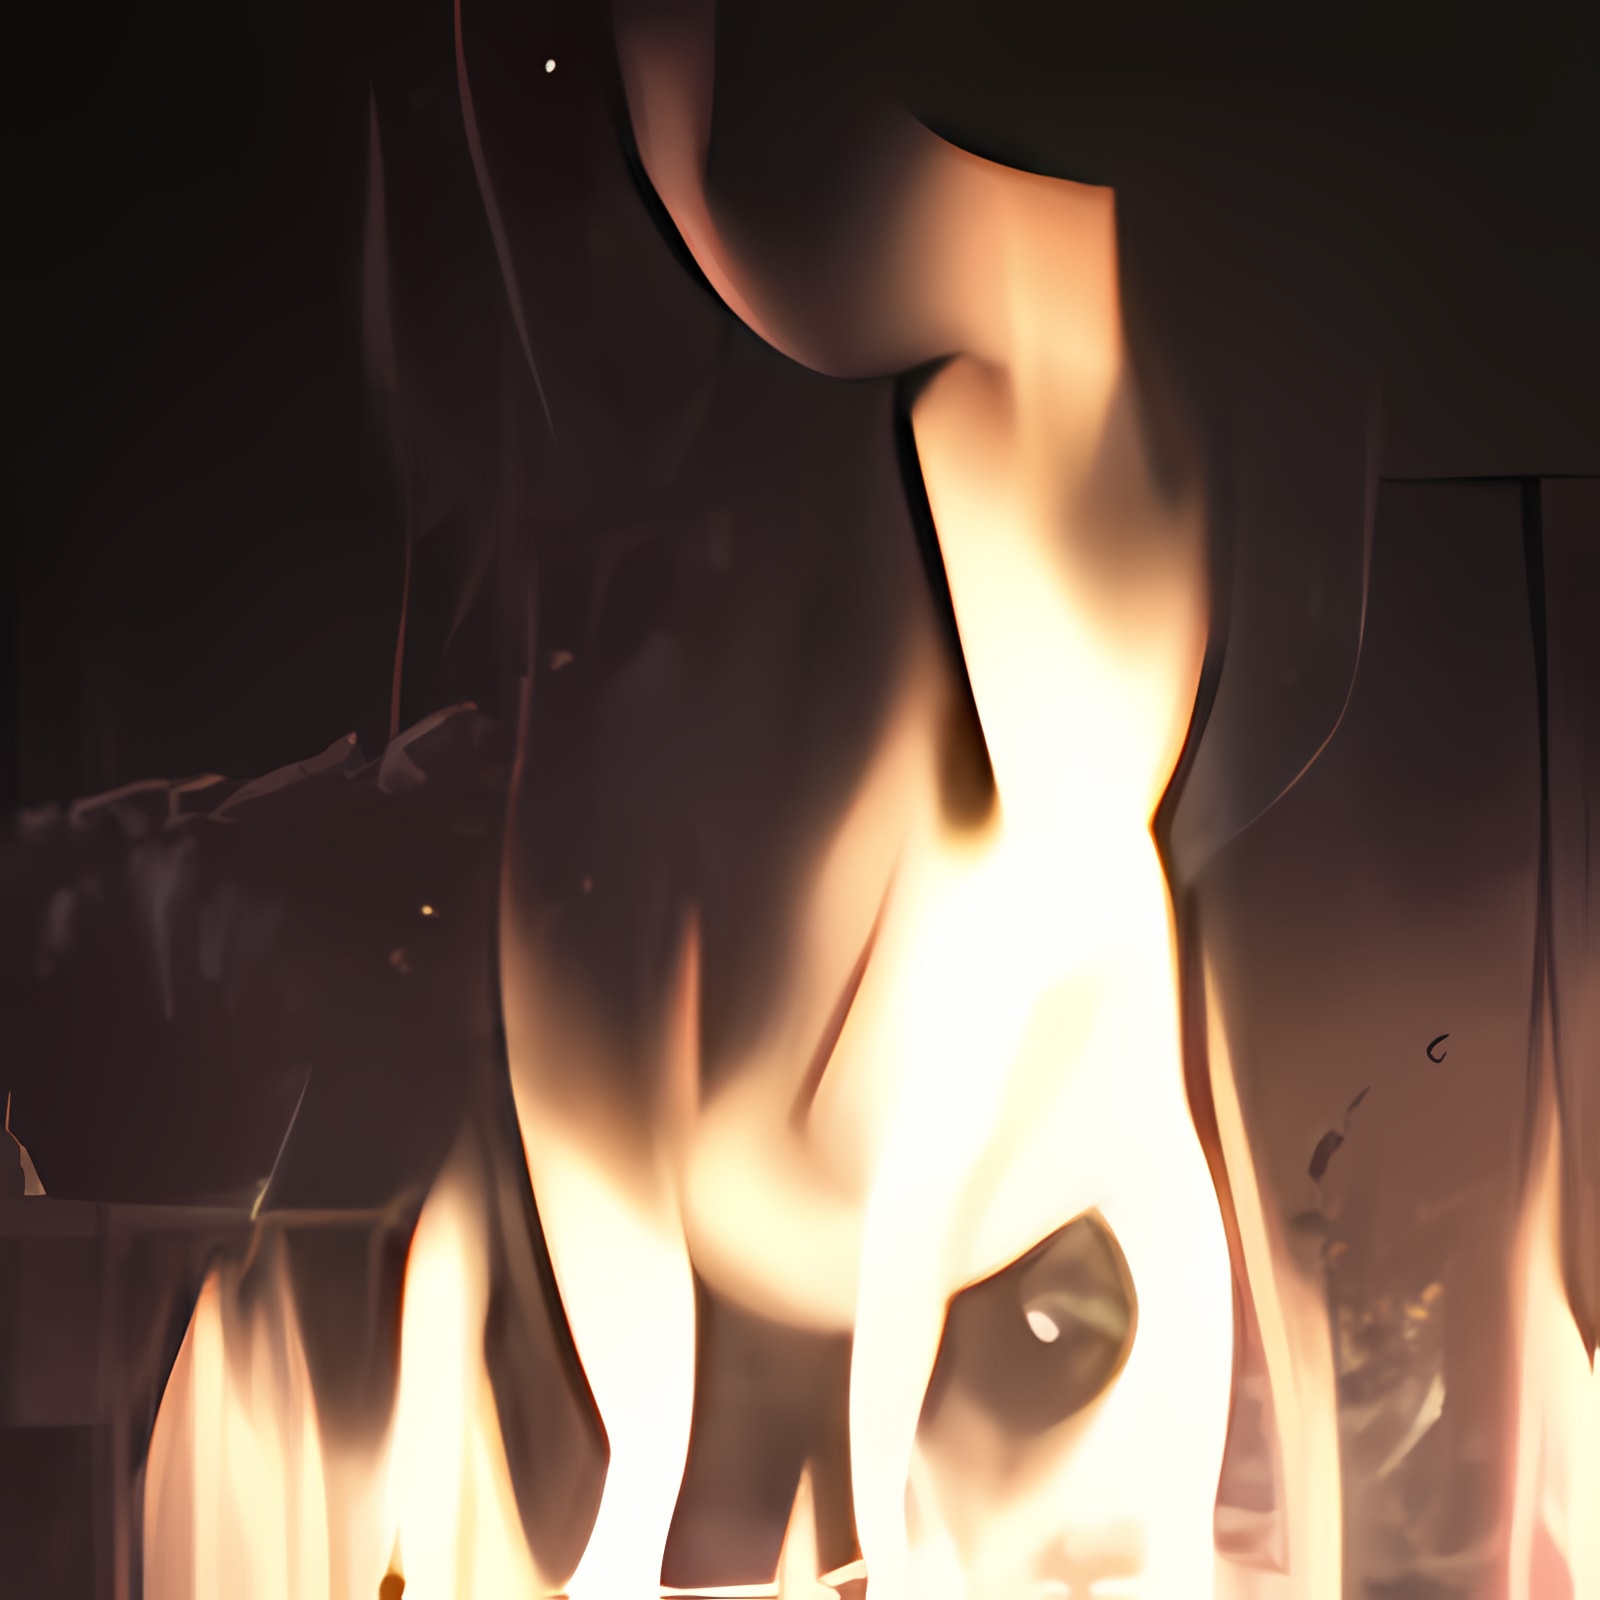 Download Fireplace Install Latest App downloader